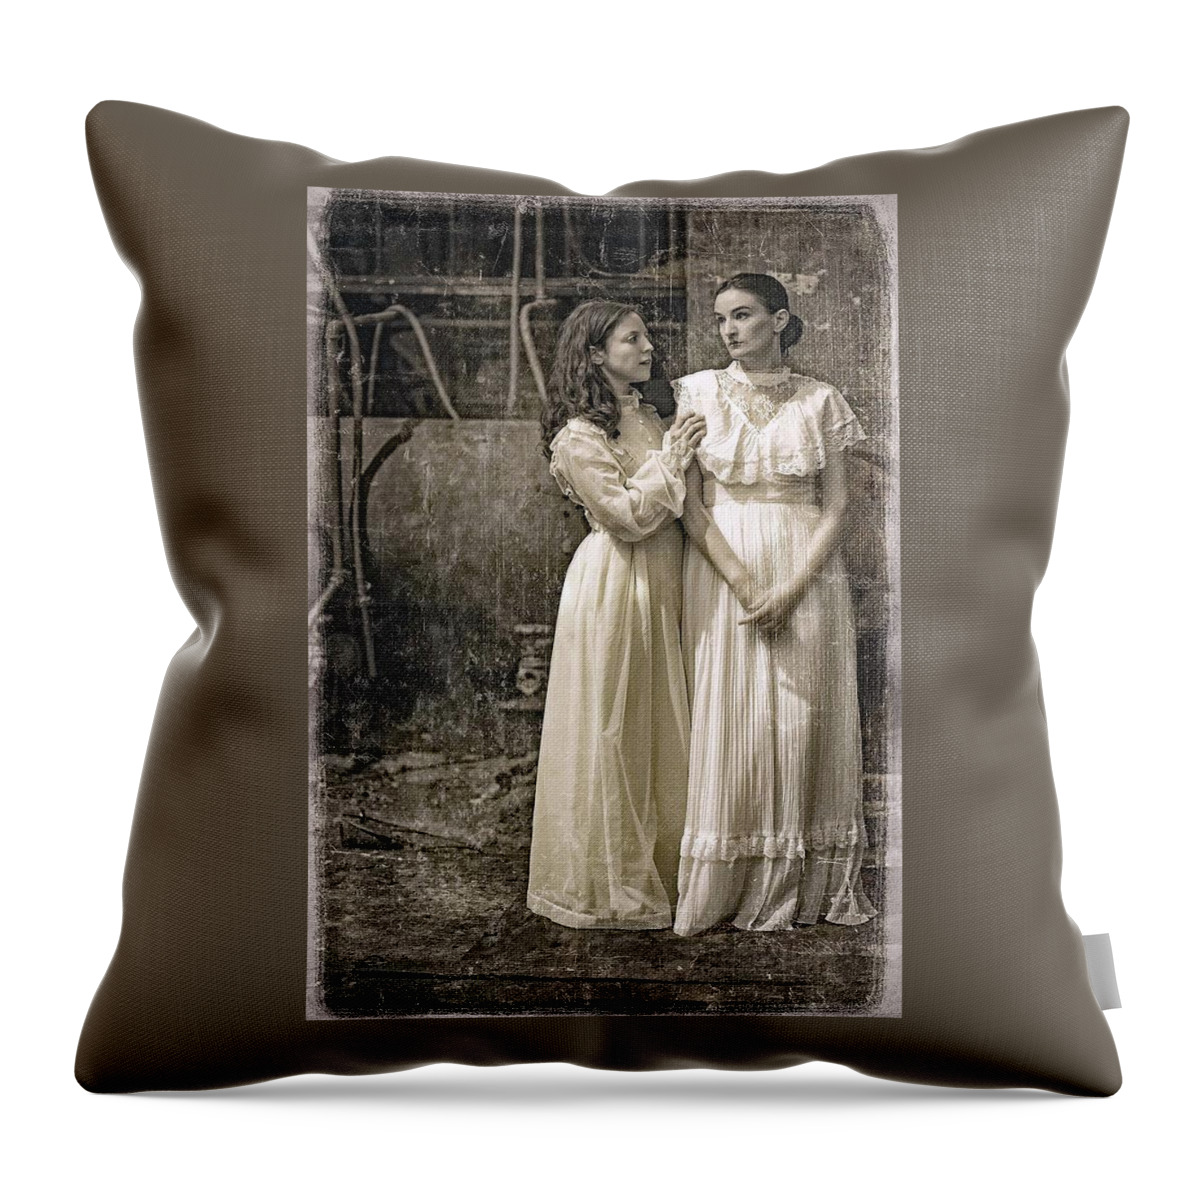 Dakota Lee And Katriella Throw Pillow featuring the photograph Friends by Bruce Bowers